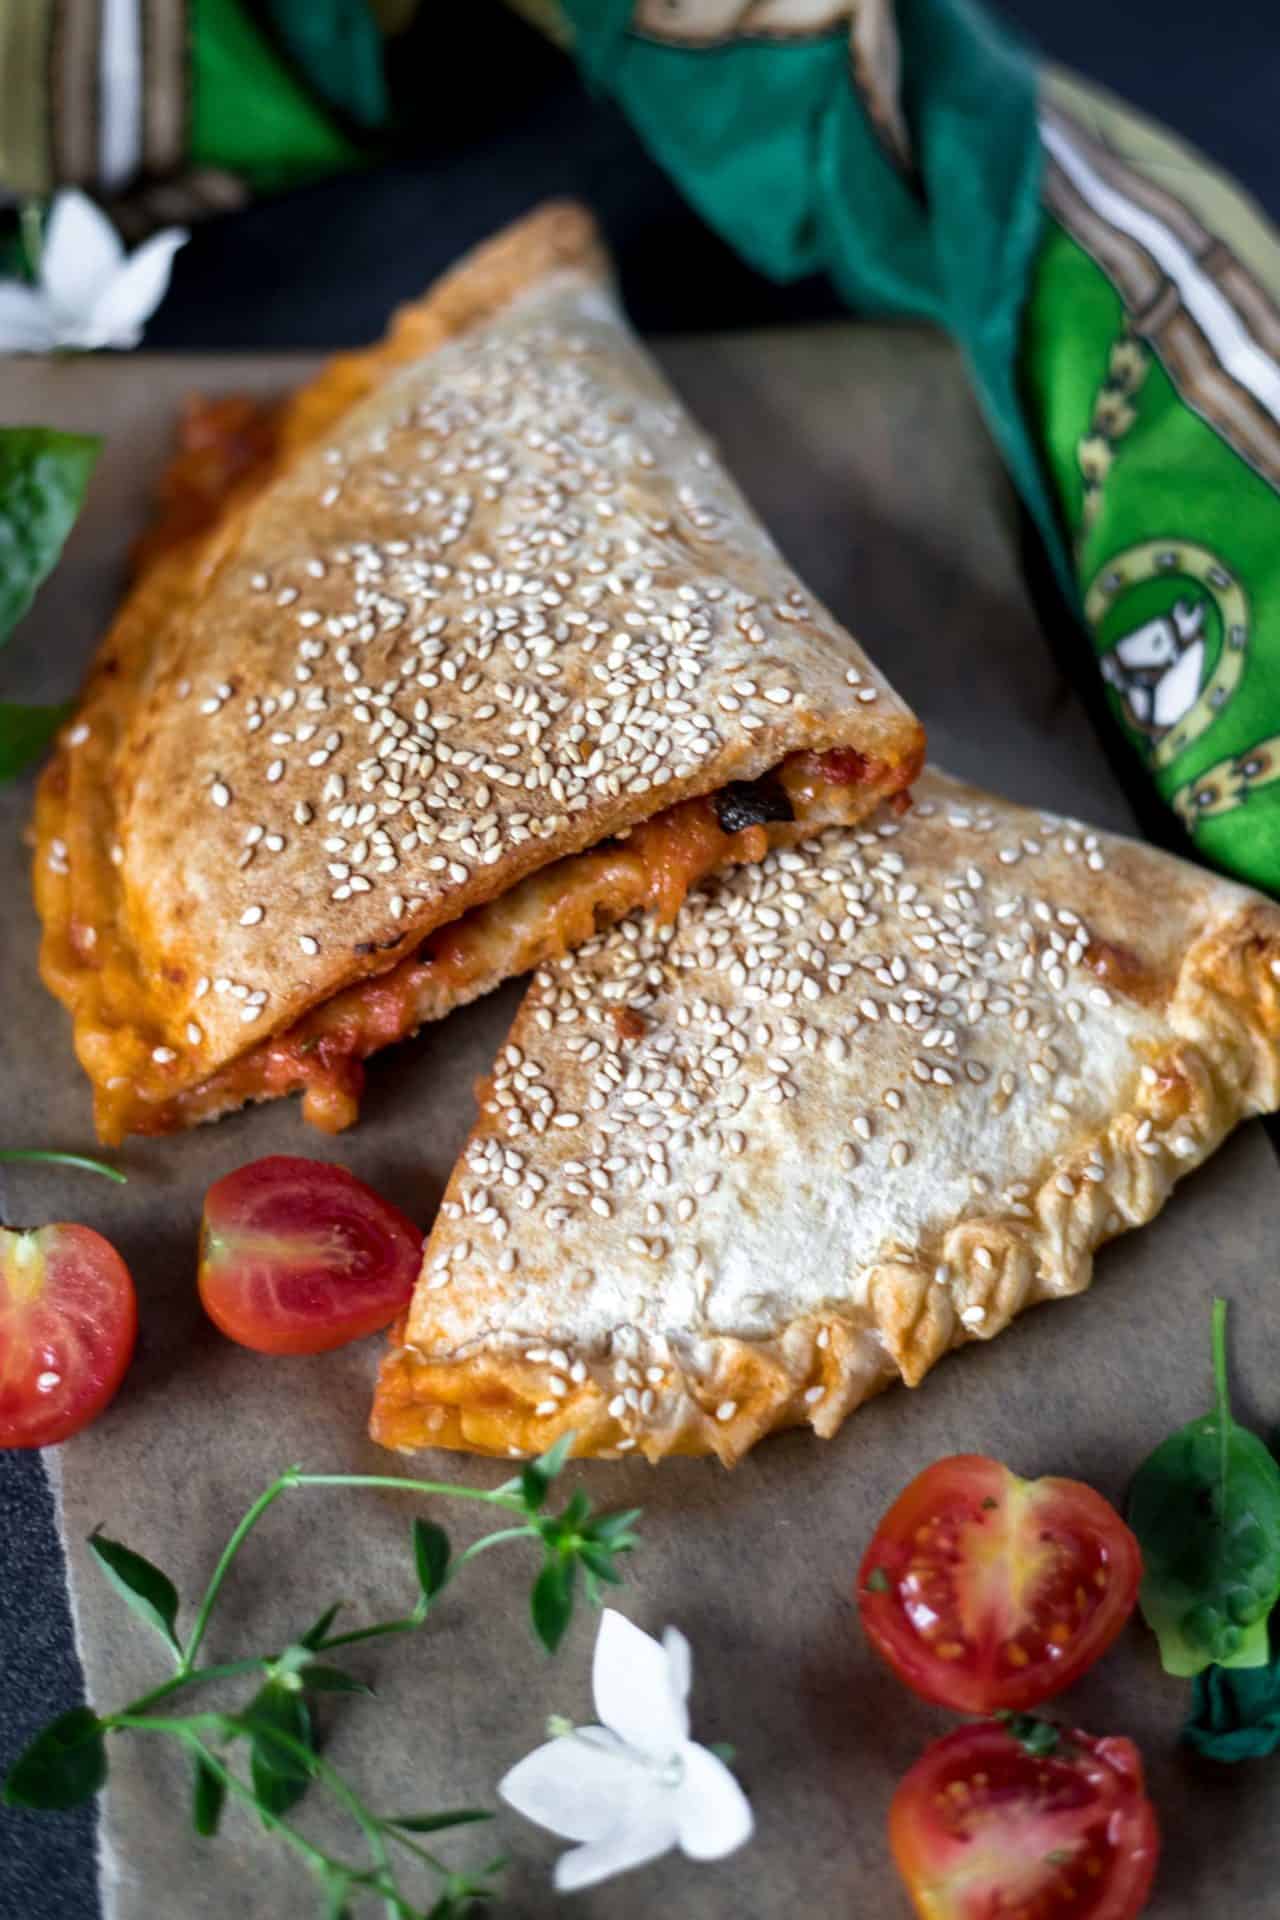 This Gluten-Free Calzone is low FODMAP and easy to digest. It is super flavorful and has a perfect texture crispy on the outside and chewy on the inside.